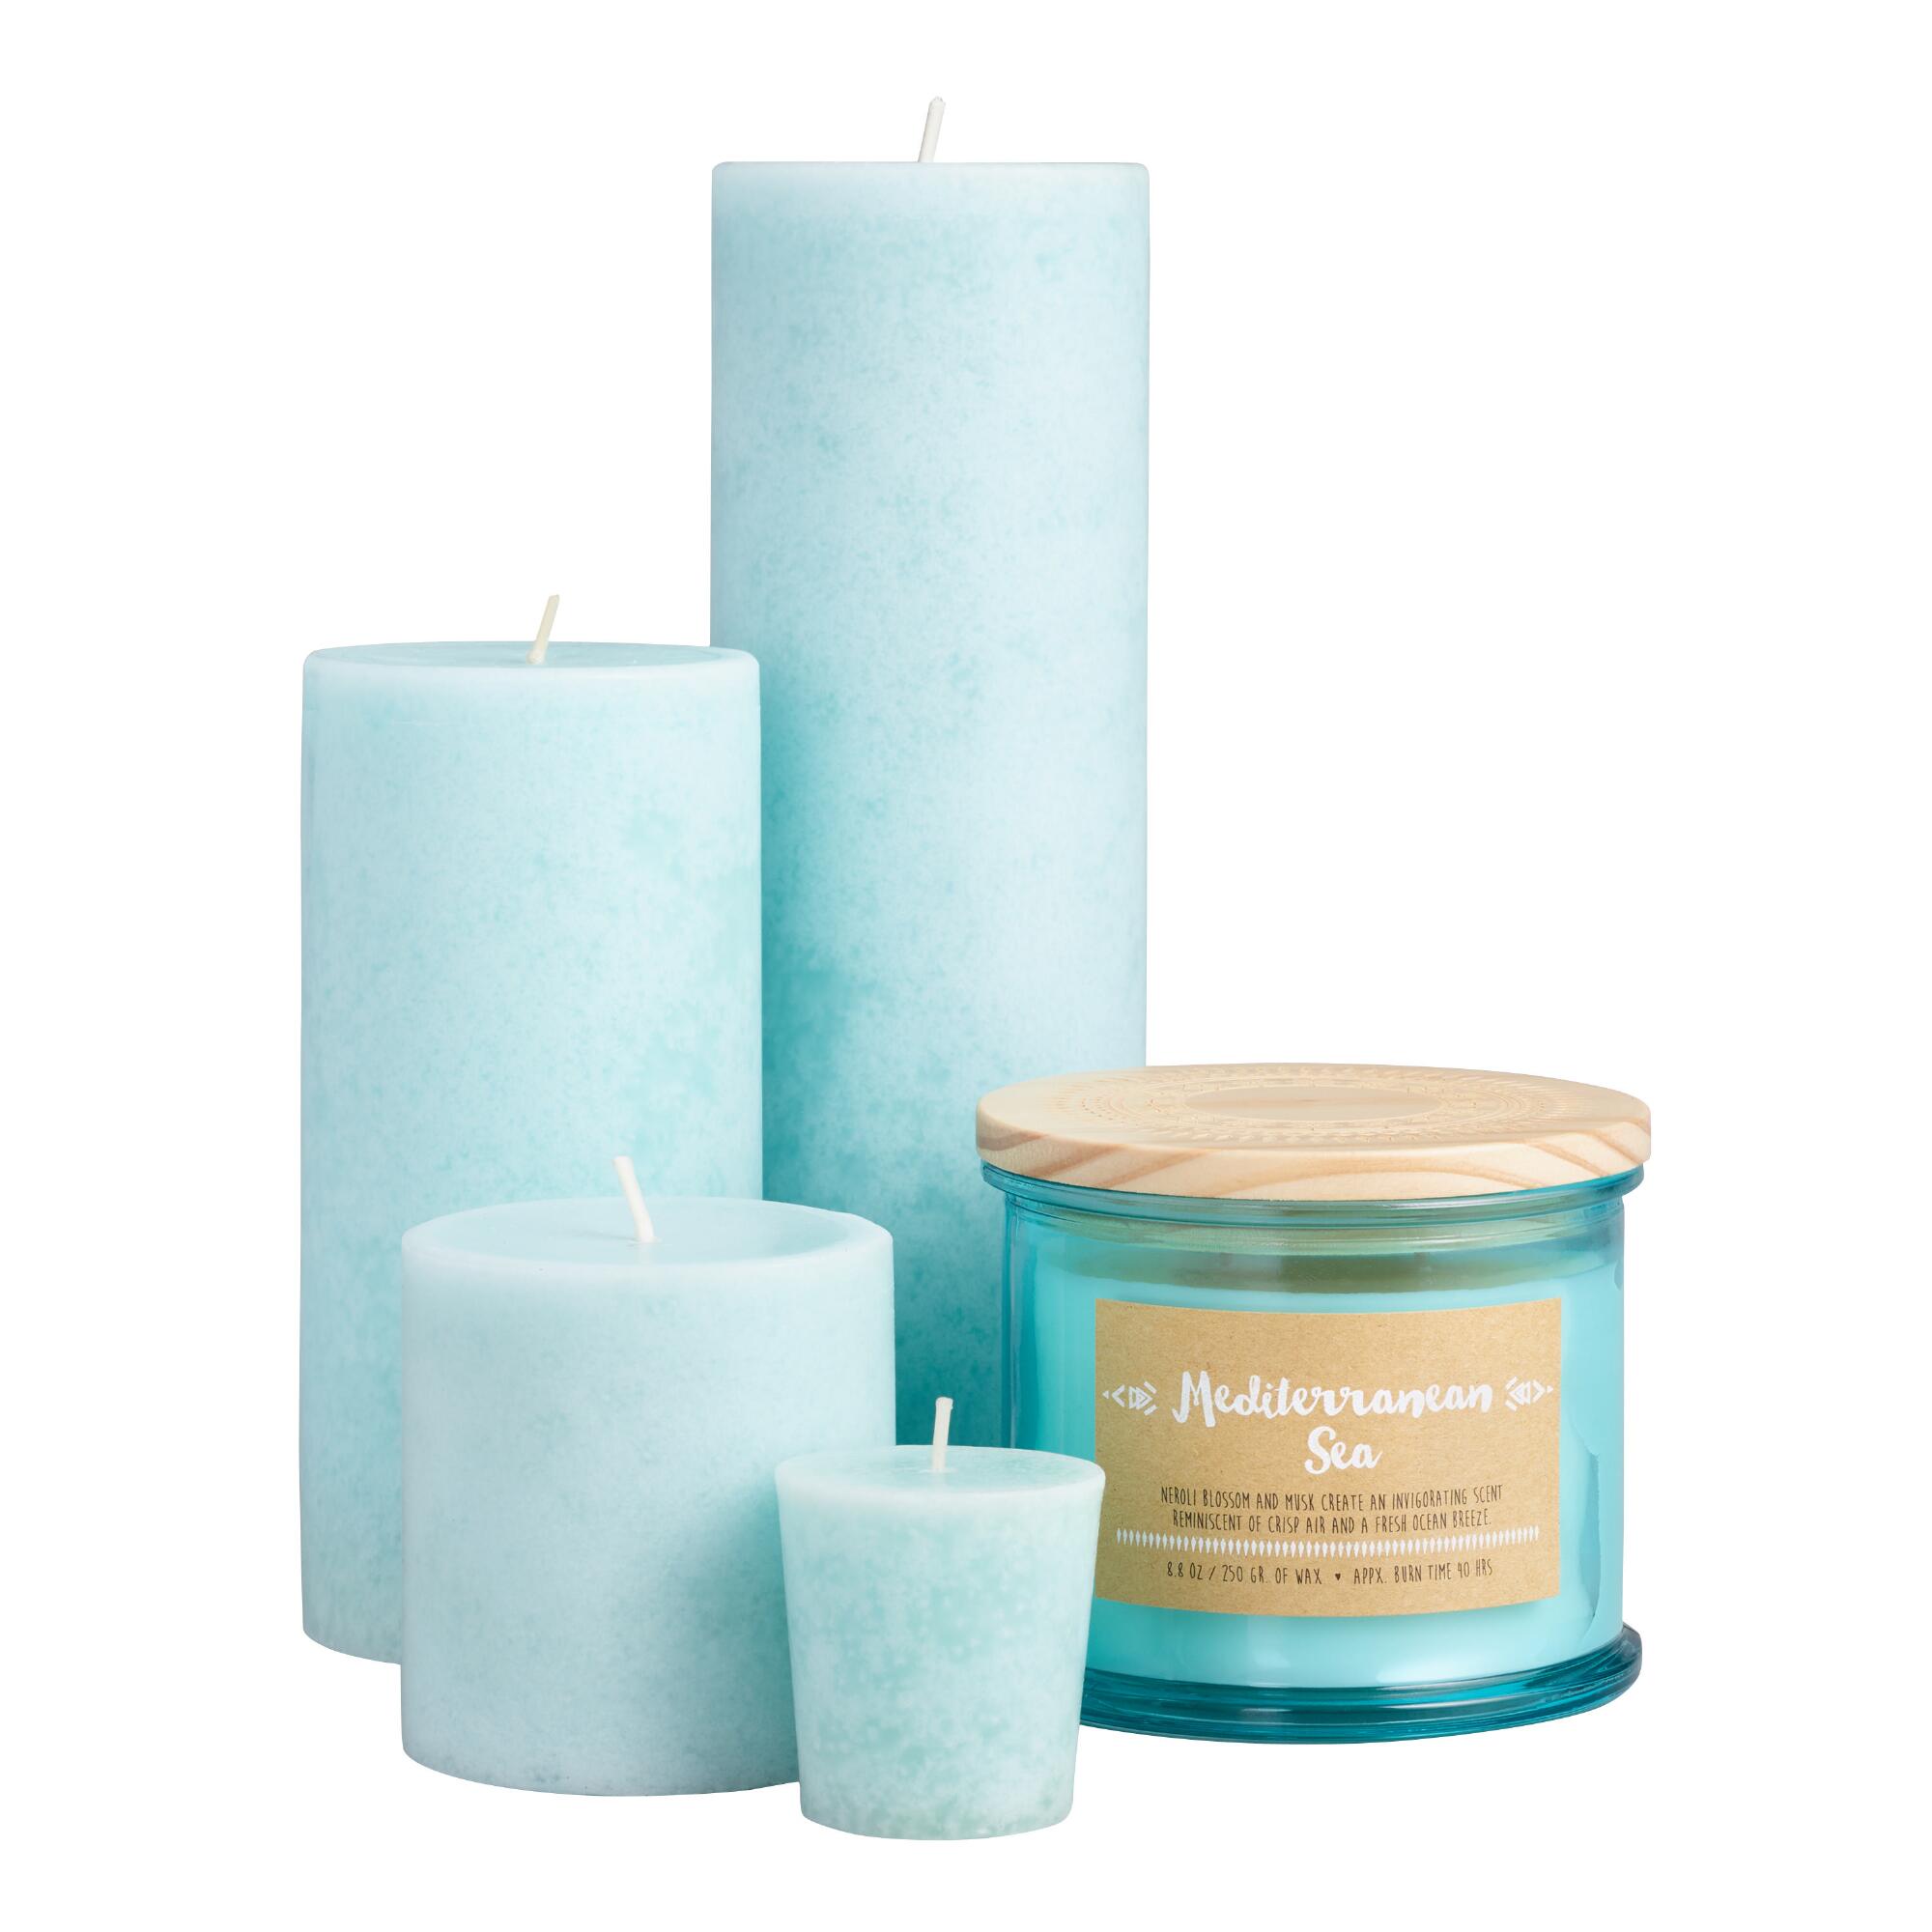 Mediterranean Sea Candle Collection by World Market